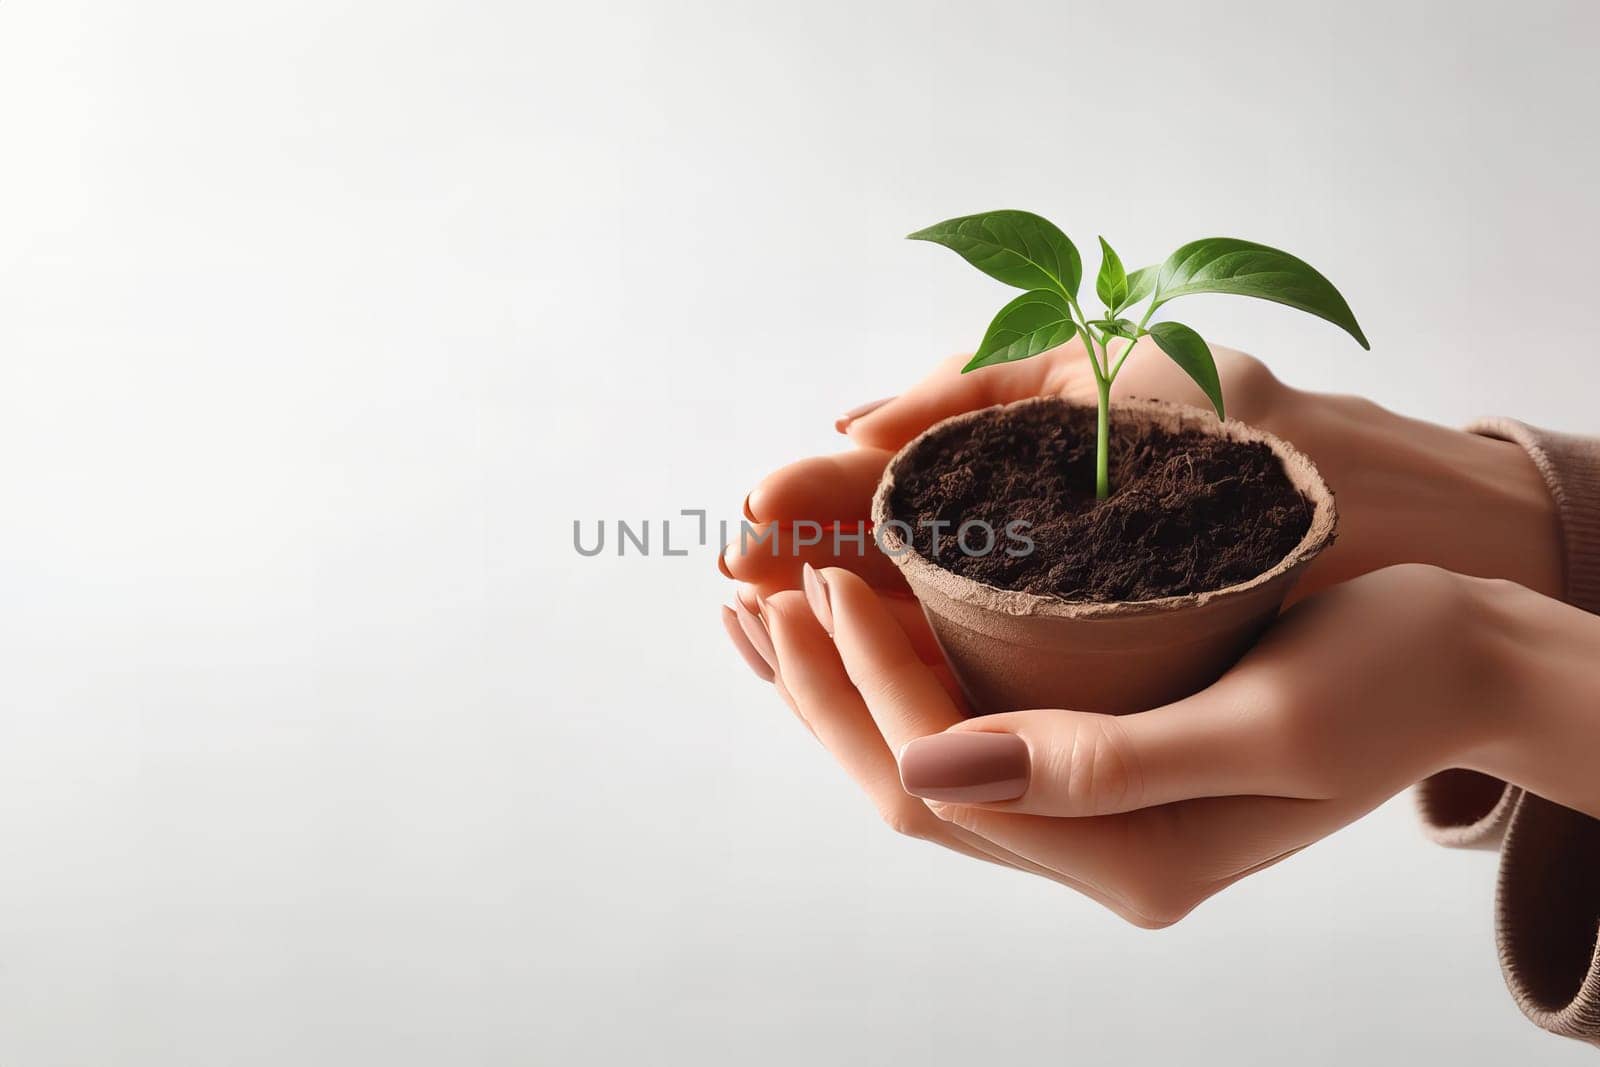 Plant in hands, on white background. The concept of ecology, environmental protection, nature, and care.